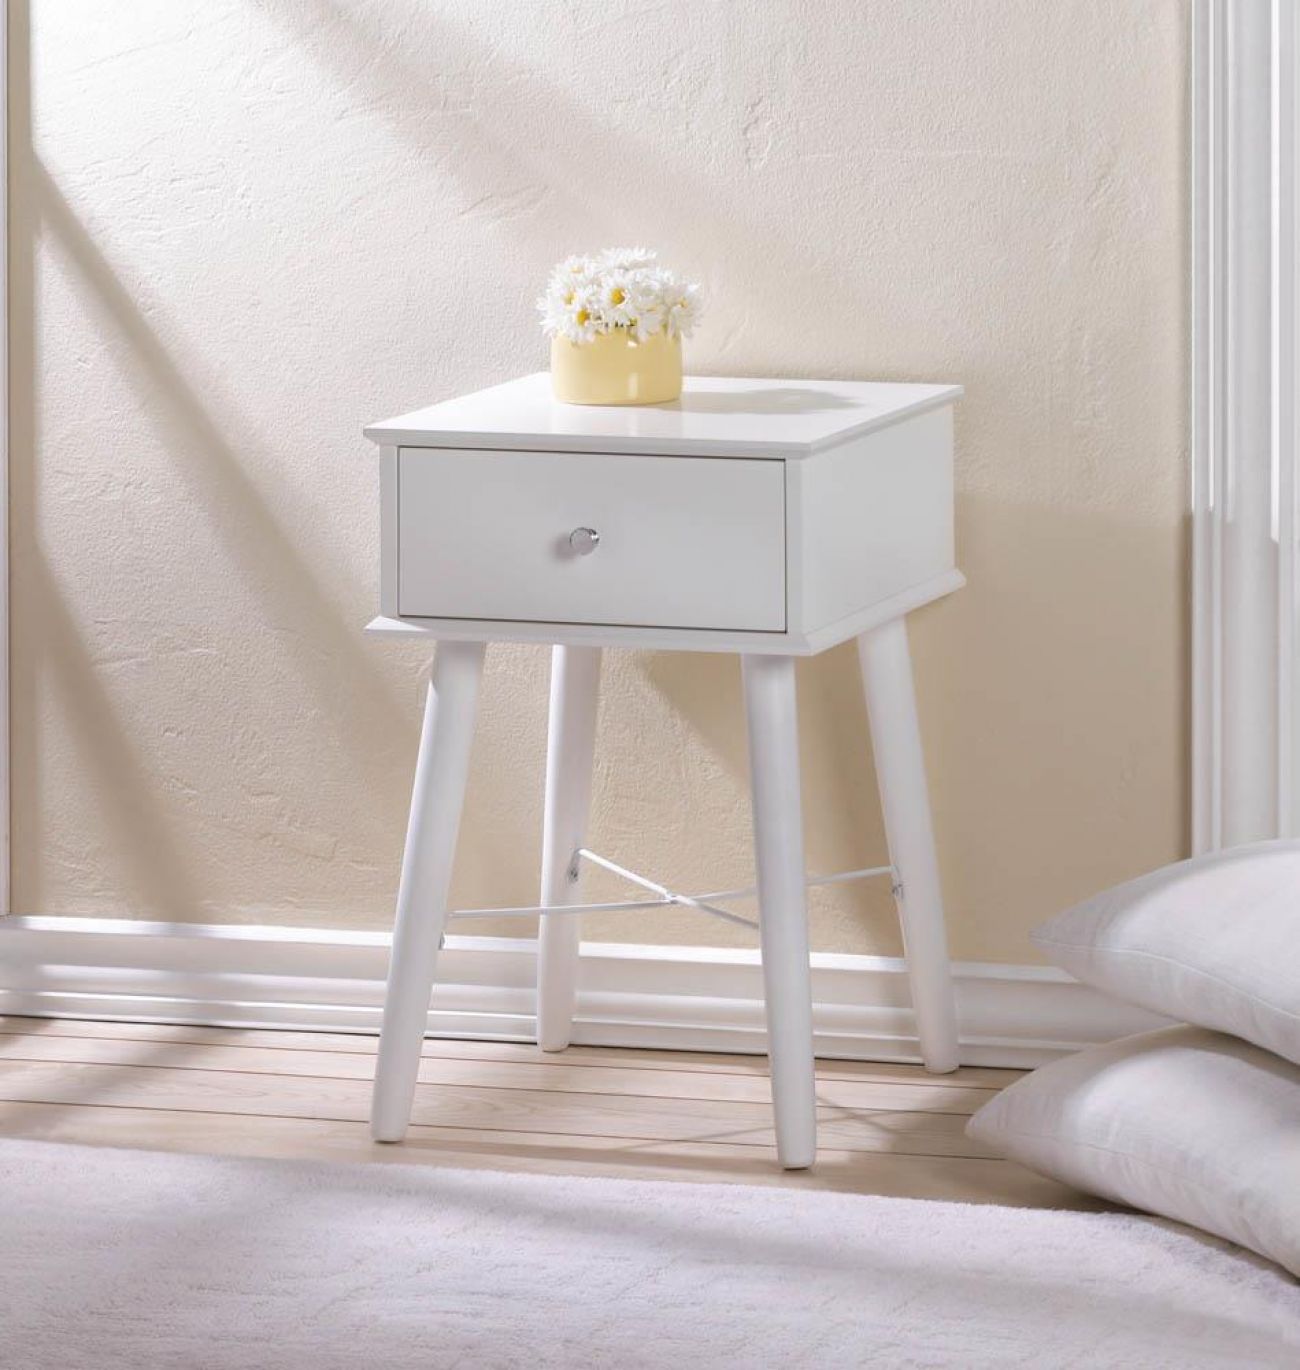 Modern Chic Side Table